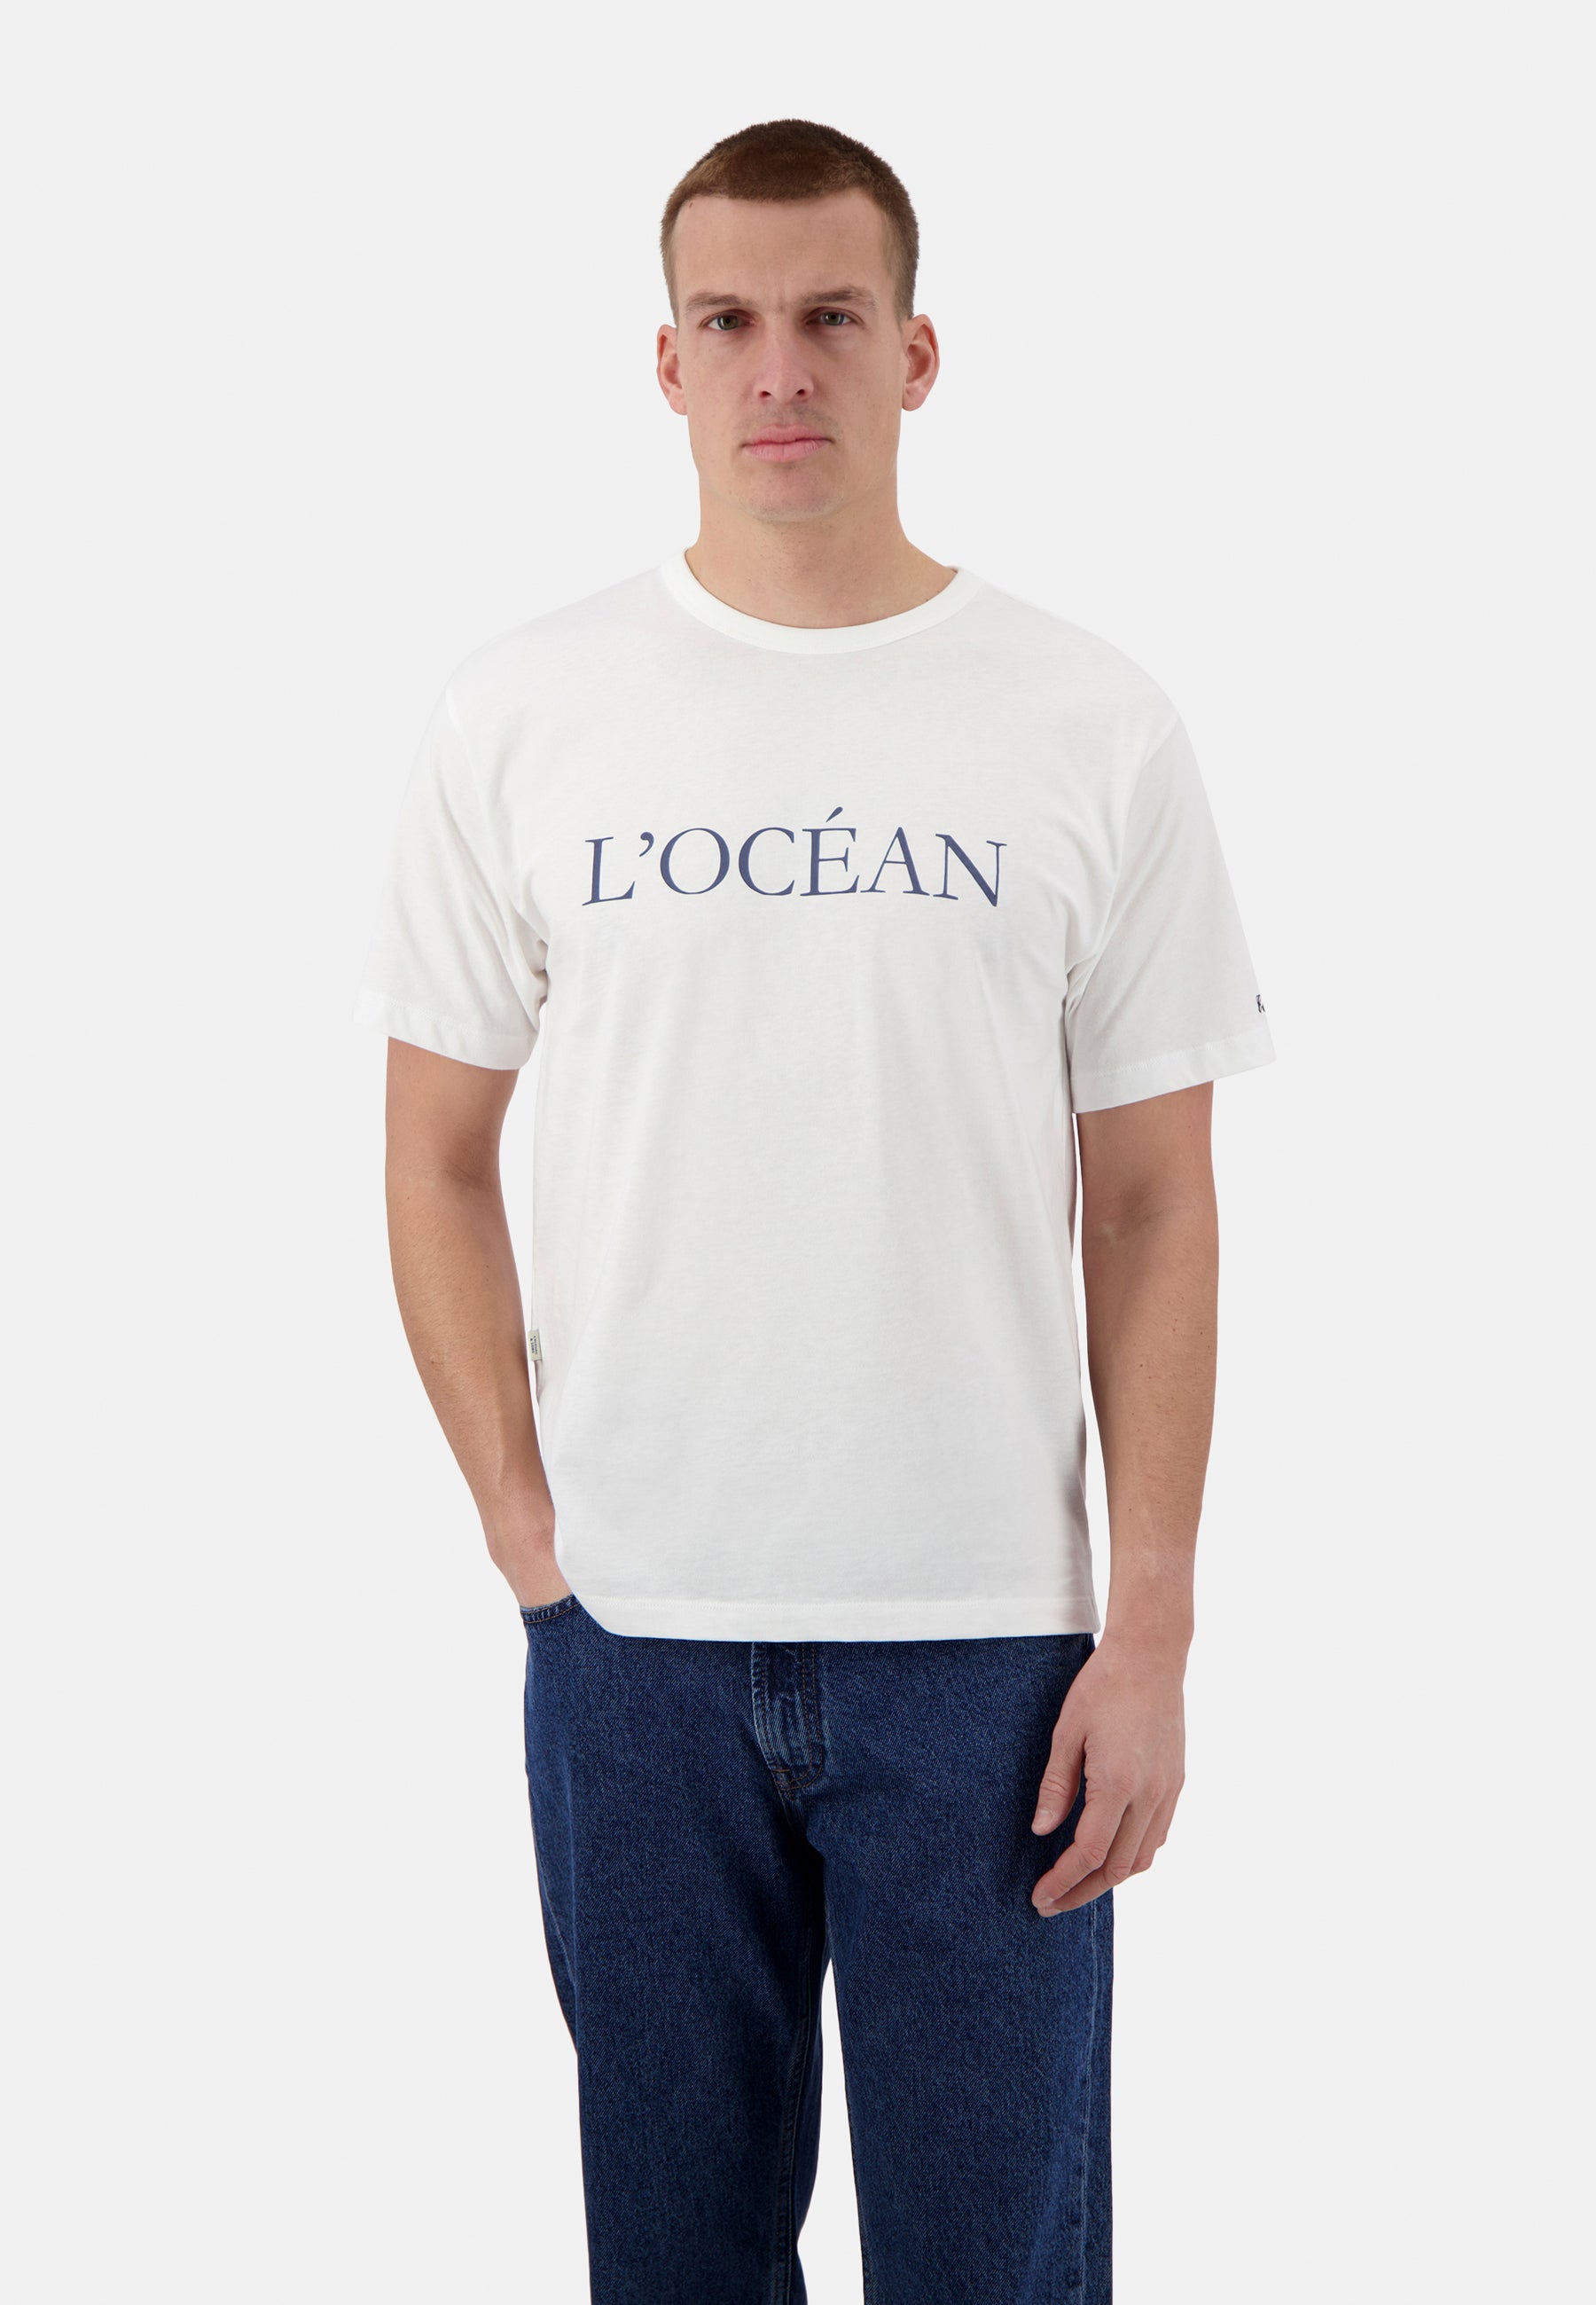 T-Shirt-L´Ocean in White T-Shirts Colours and Sons   